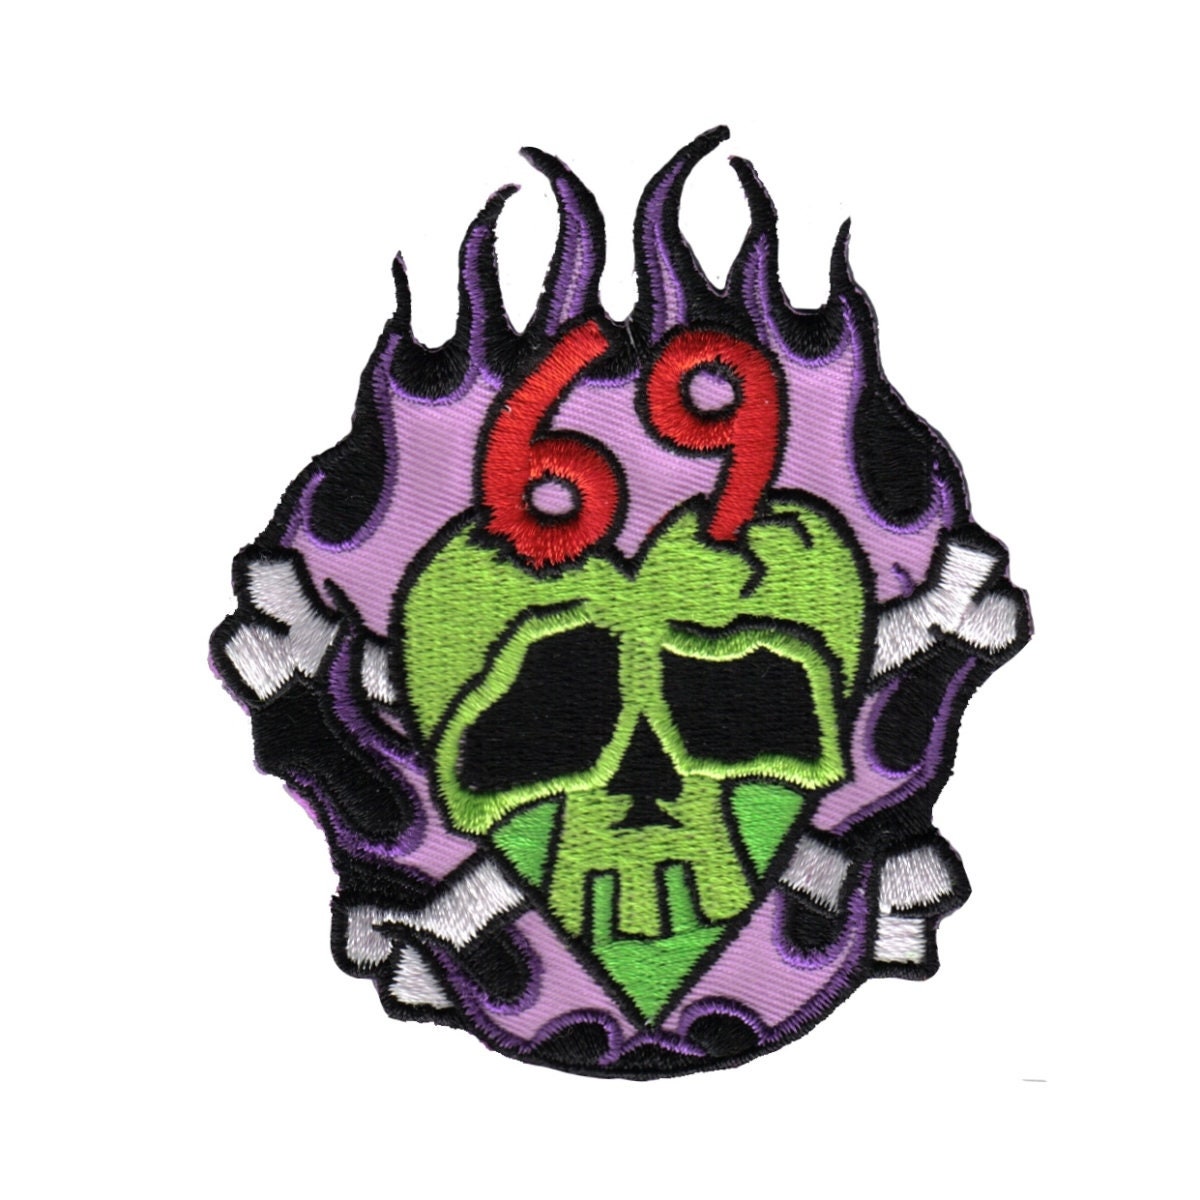 Kruse 69 Monster Skull Patch Crossbones Flames Ink Embroidered Iron on  Applique -  Canada